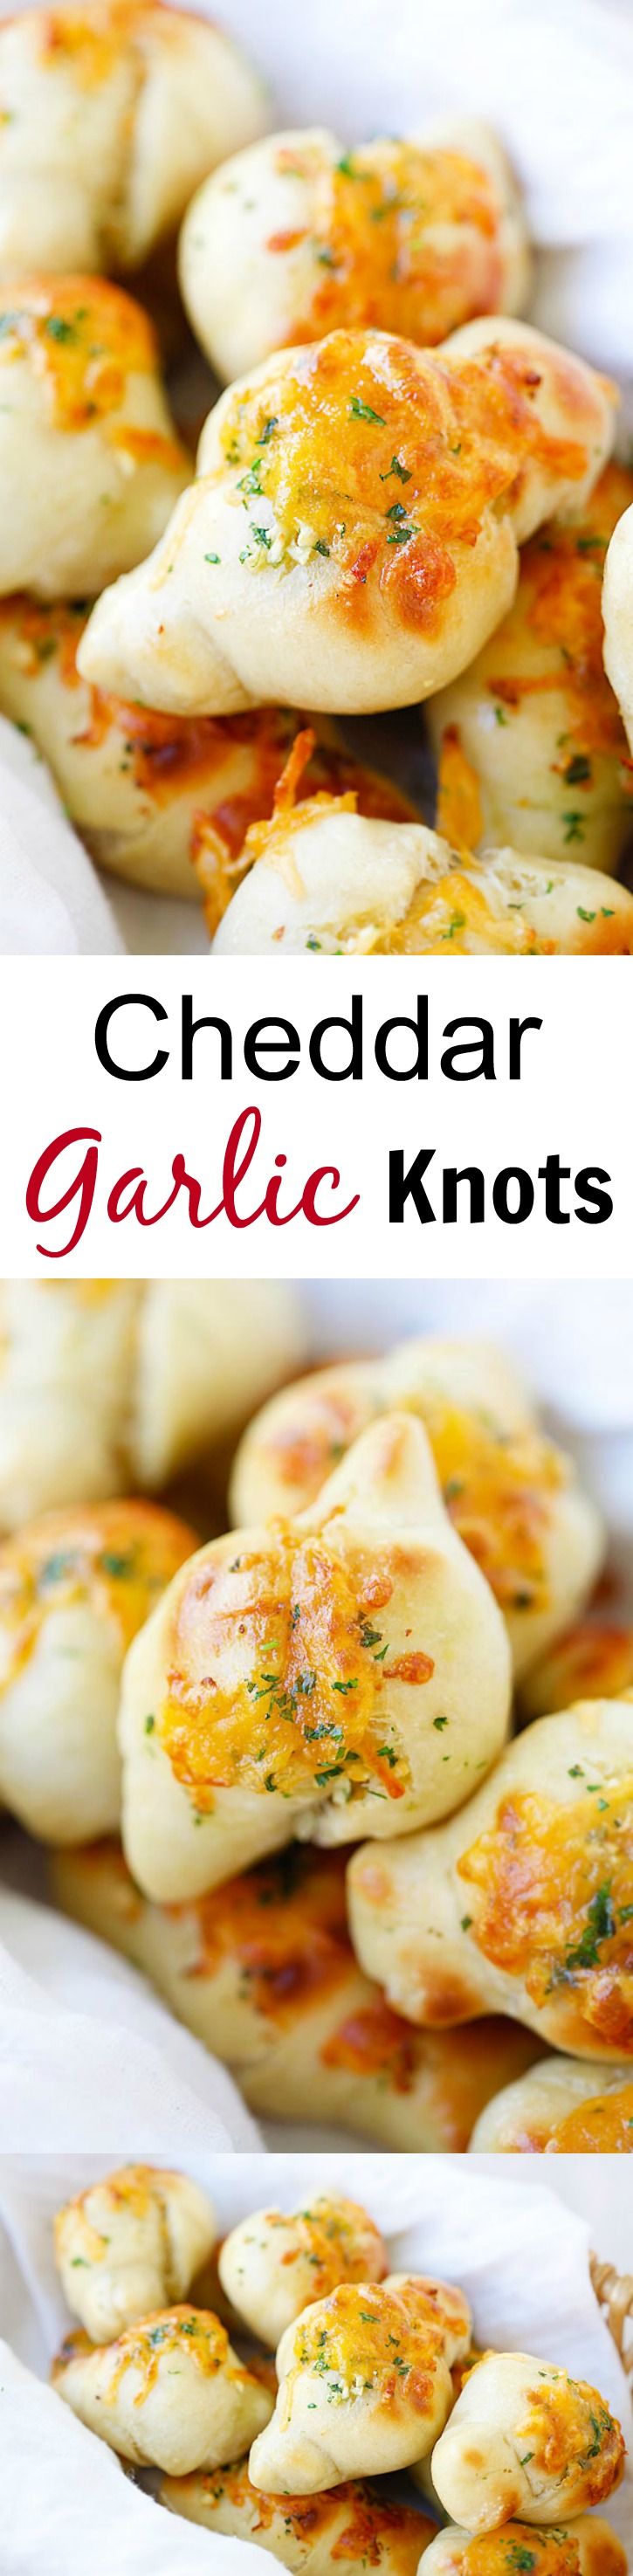 Cheddar Garlic Knots – cheesy, buttery garlic knots that anyone can make at home as a side dish, takes only 20 minutes from prep to dinner table!! | rasamalaysia.com